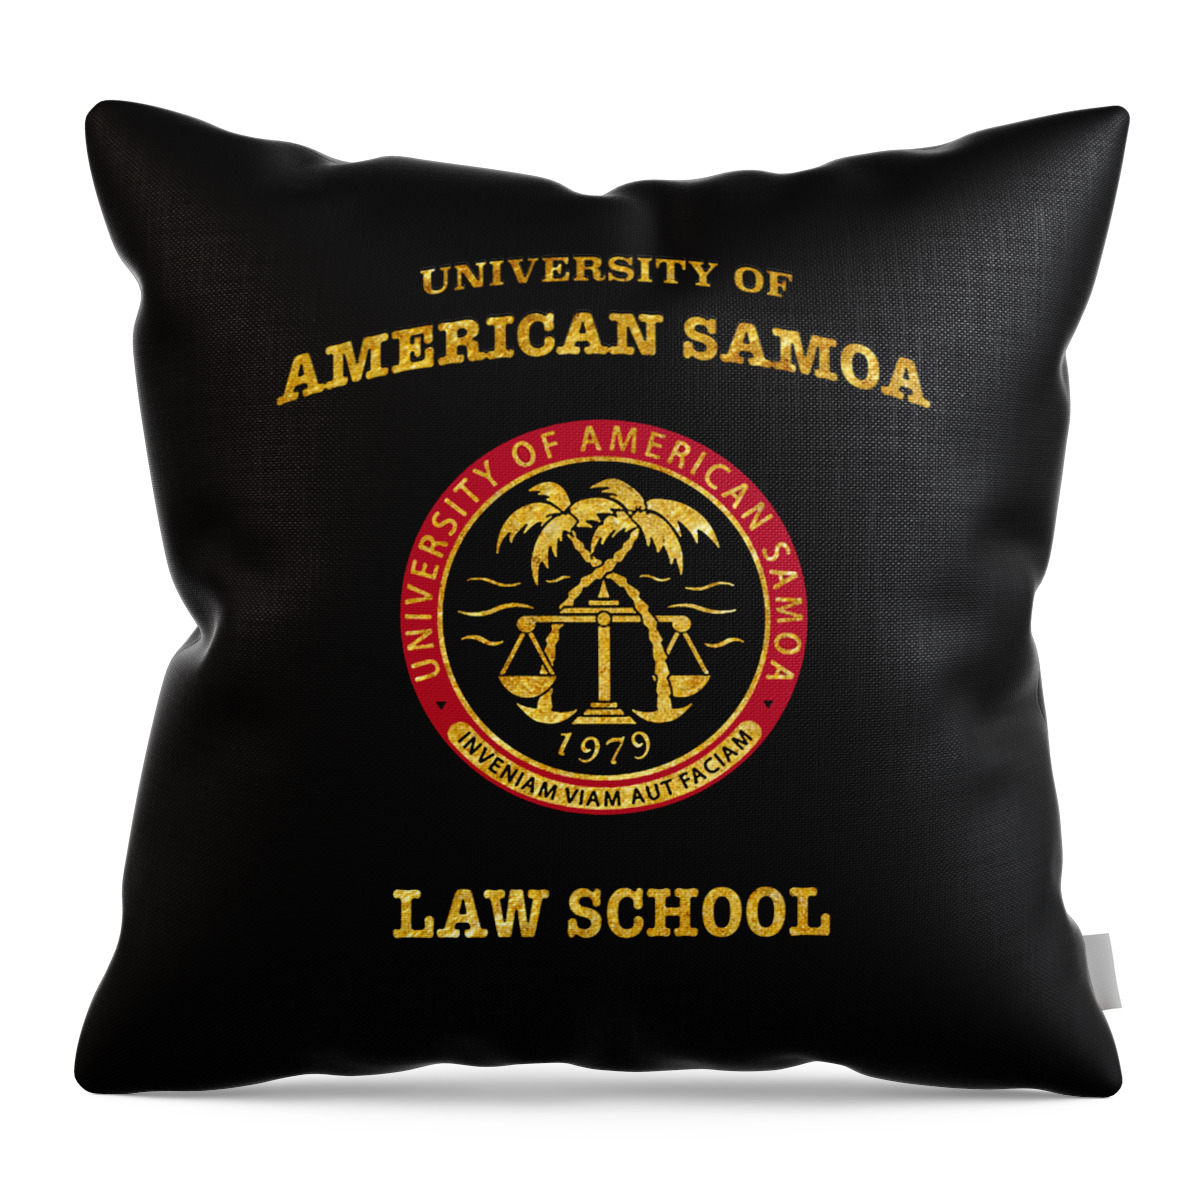 University Throw Pillow featuring the digital art University of American Samoa by Coralie Brousse